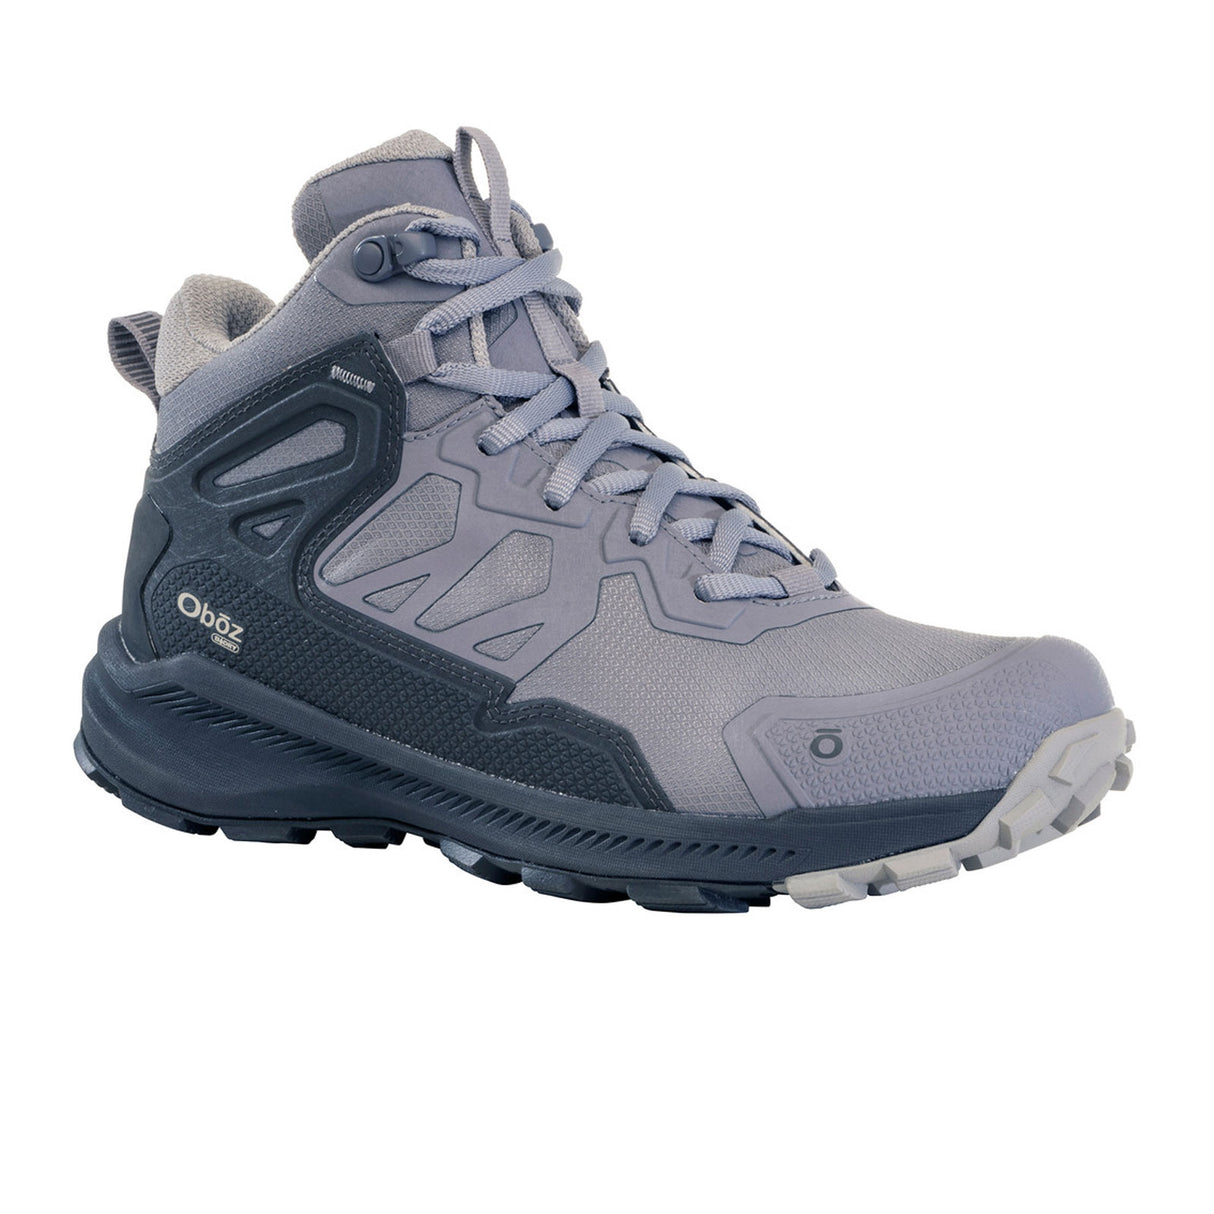 Oboz Katabatic Mid B-DRY Hiking Boot (Women) - Mineral Hiking - Mid - The Heel Shoe Fitters